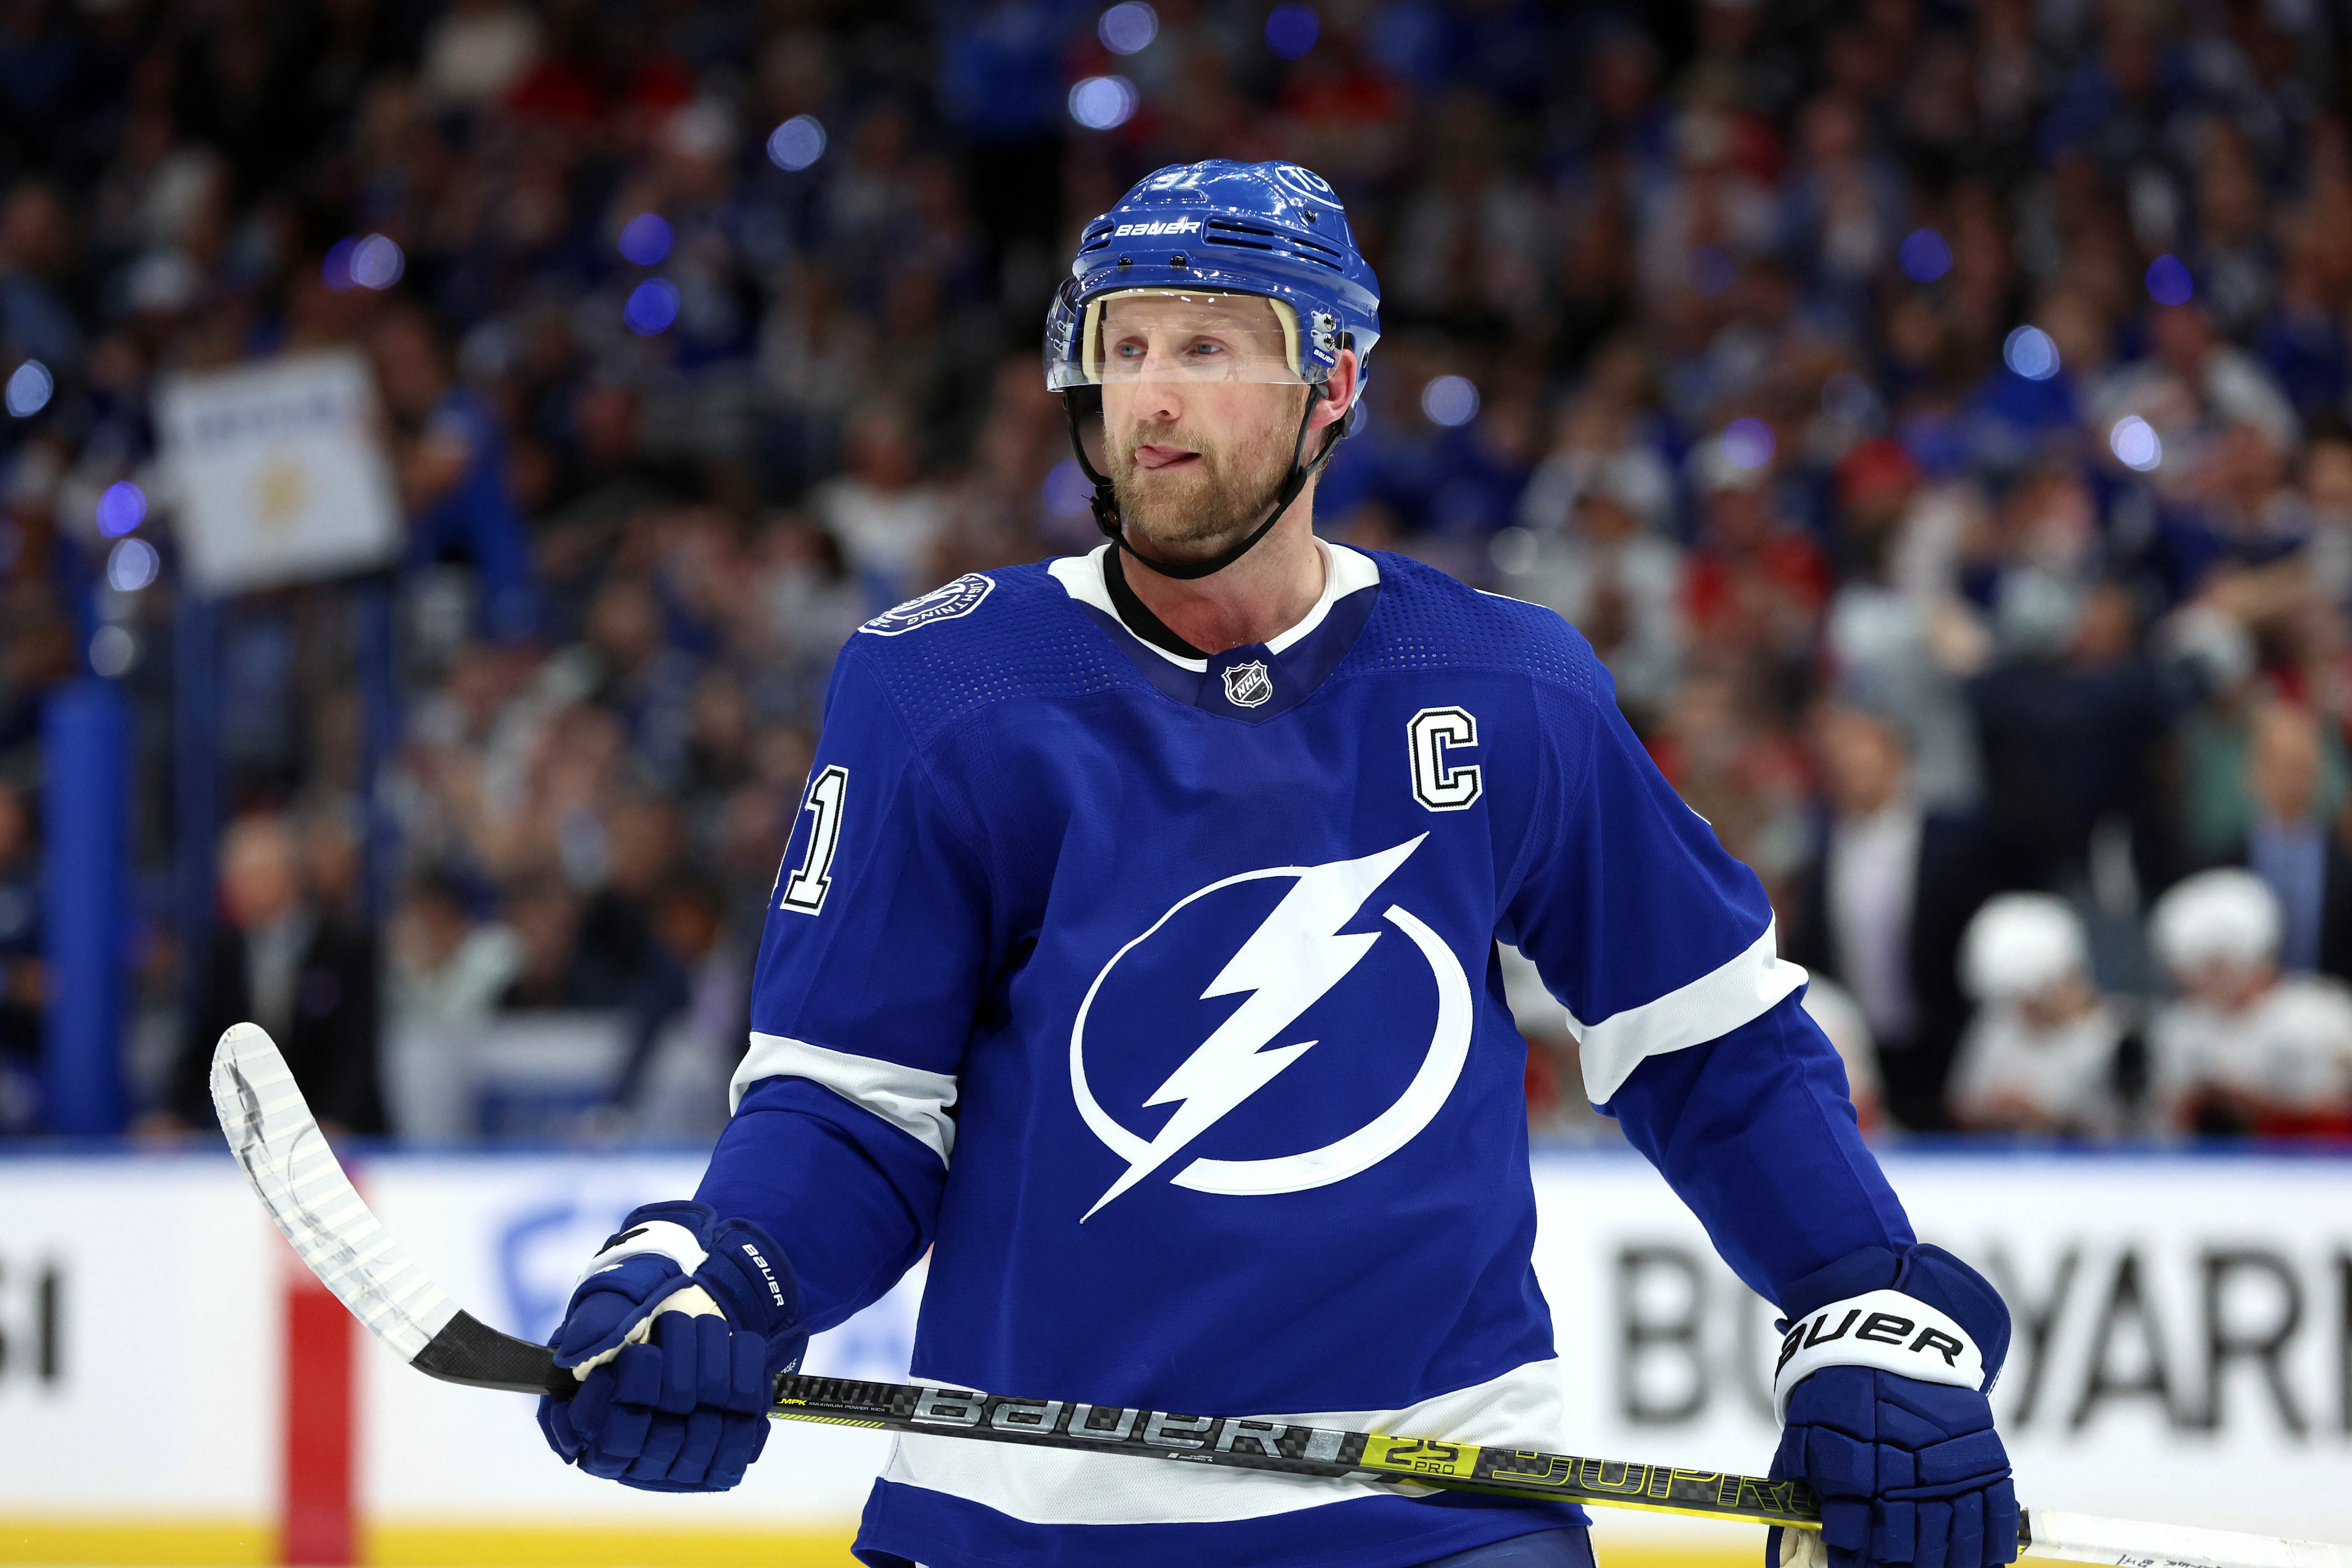 Steven Stamkos is the top NHL free agent (IMAGN)